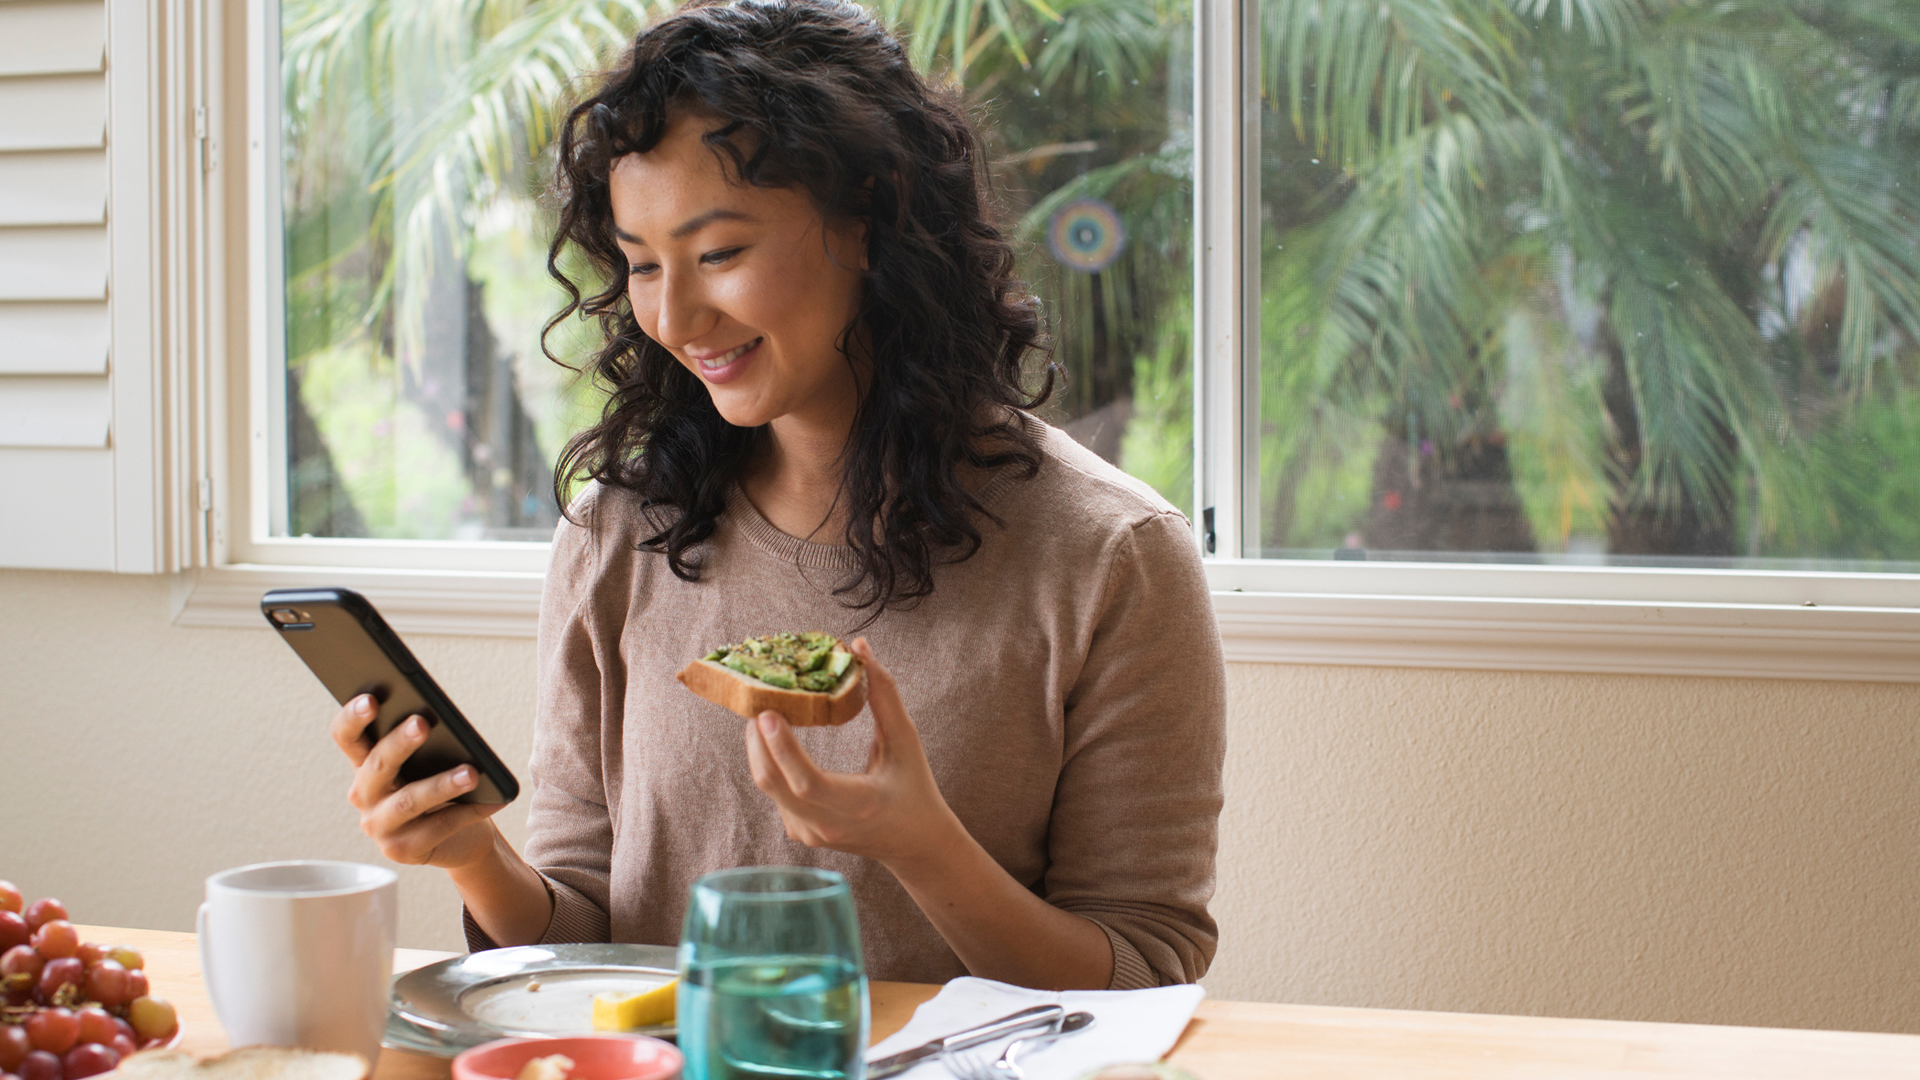 woman eating avocado on toast whilst looking at her phone